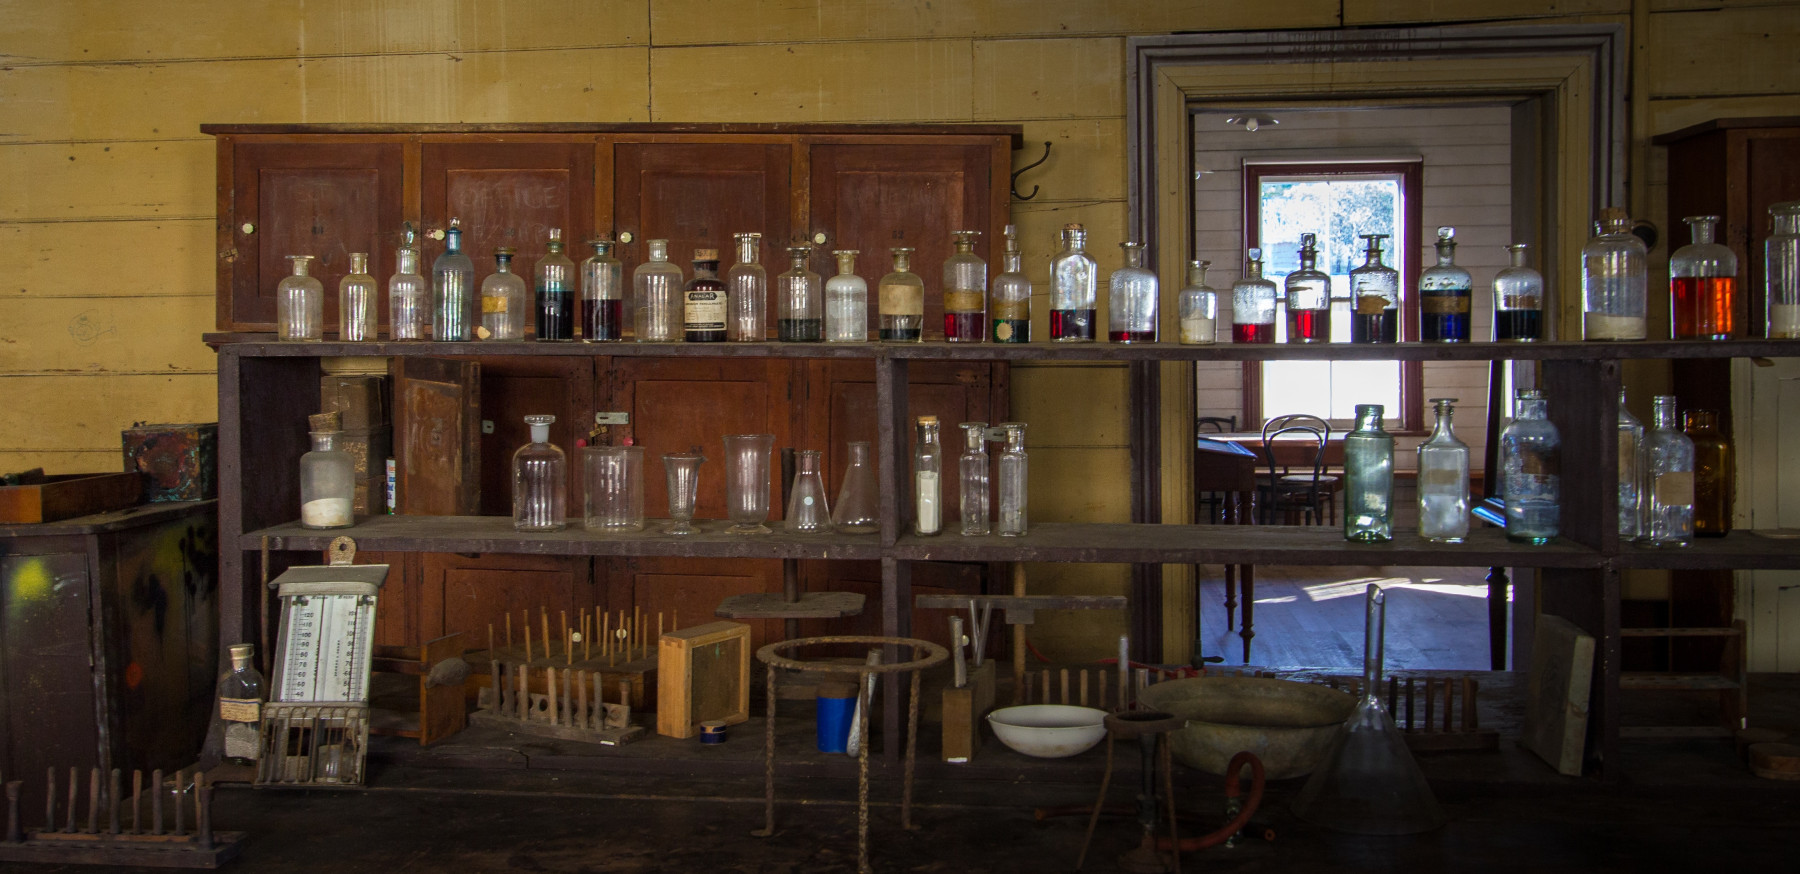 Historic chemical bottles on a shelf with a doorway behind.